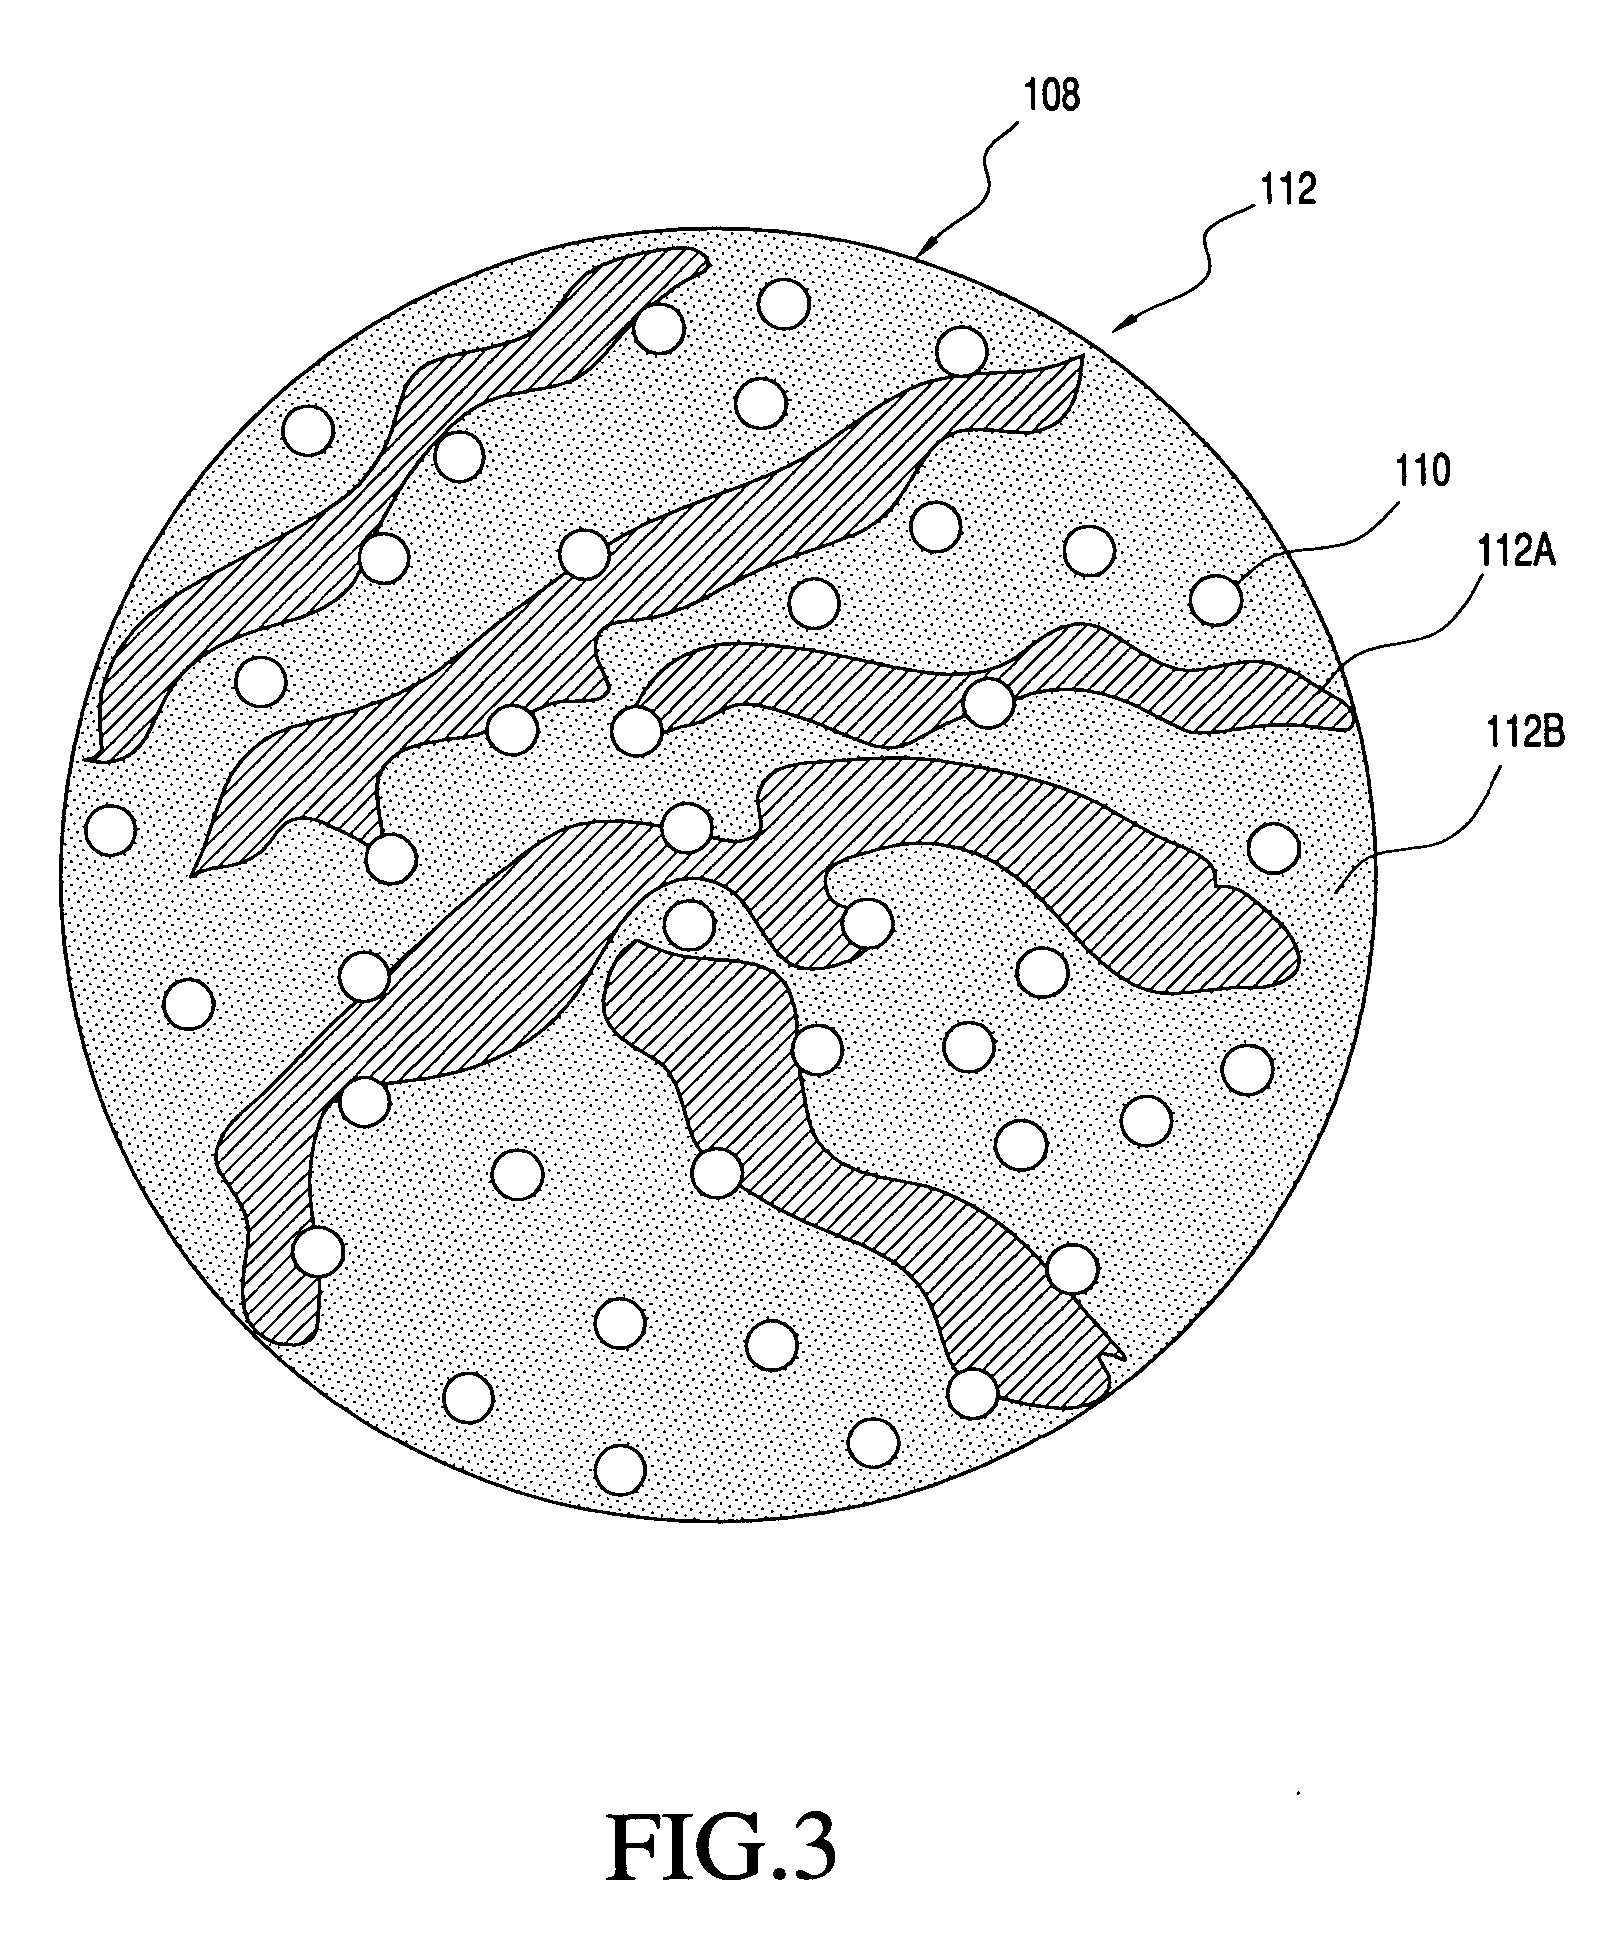 Multi-component particles comprising inorganic nanoparticles distributed in an organic matrix and processes for making and using same